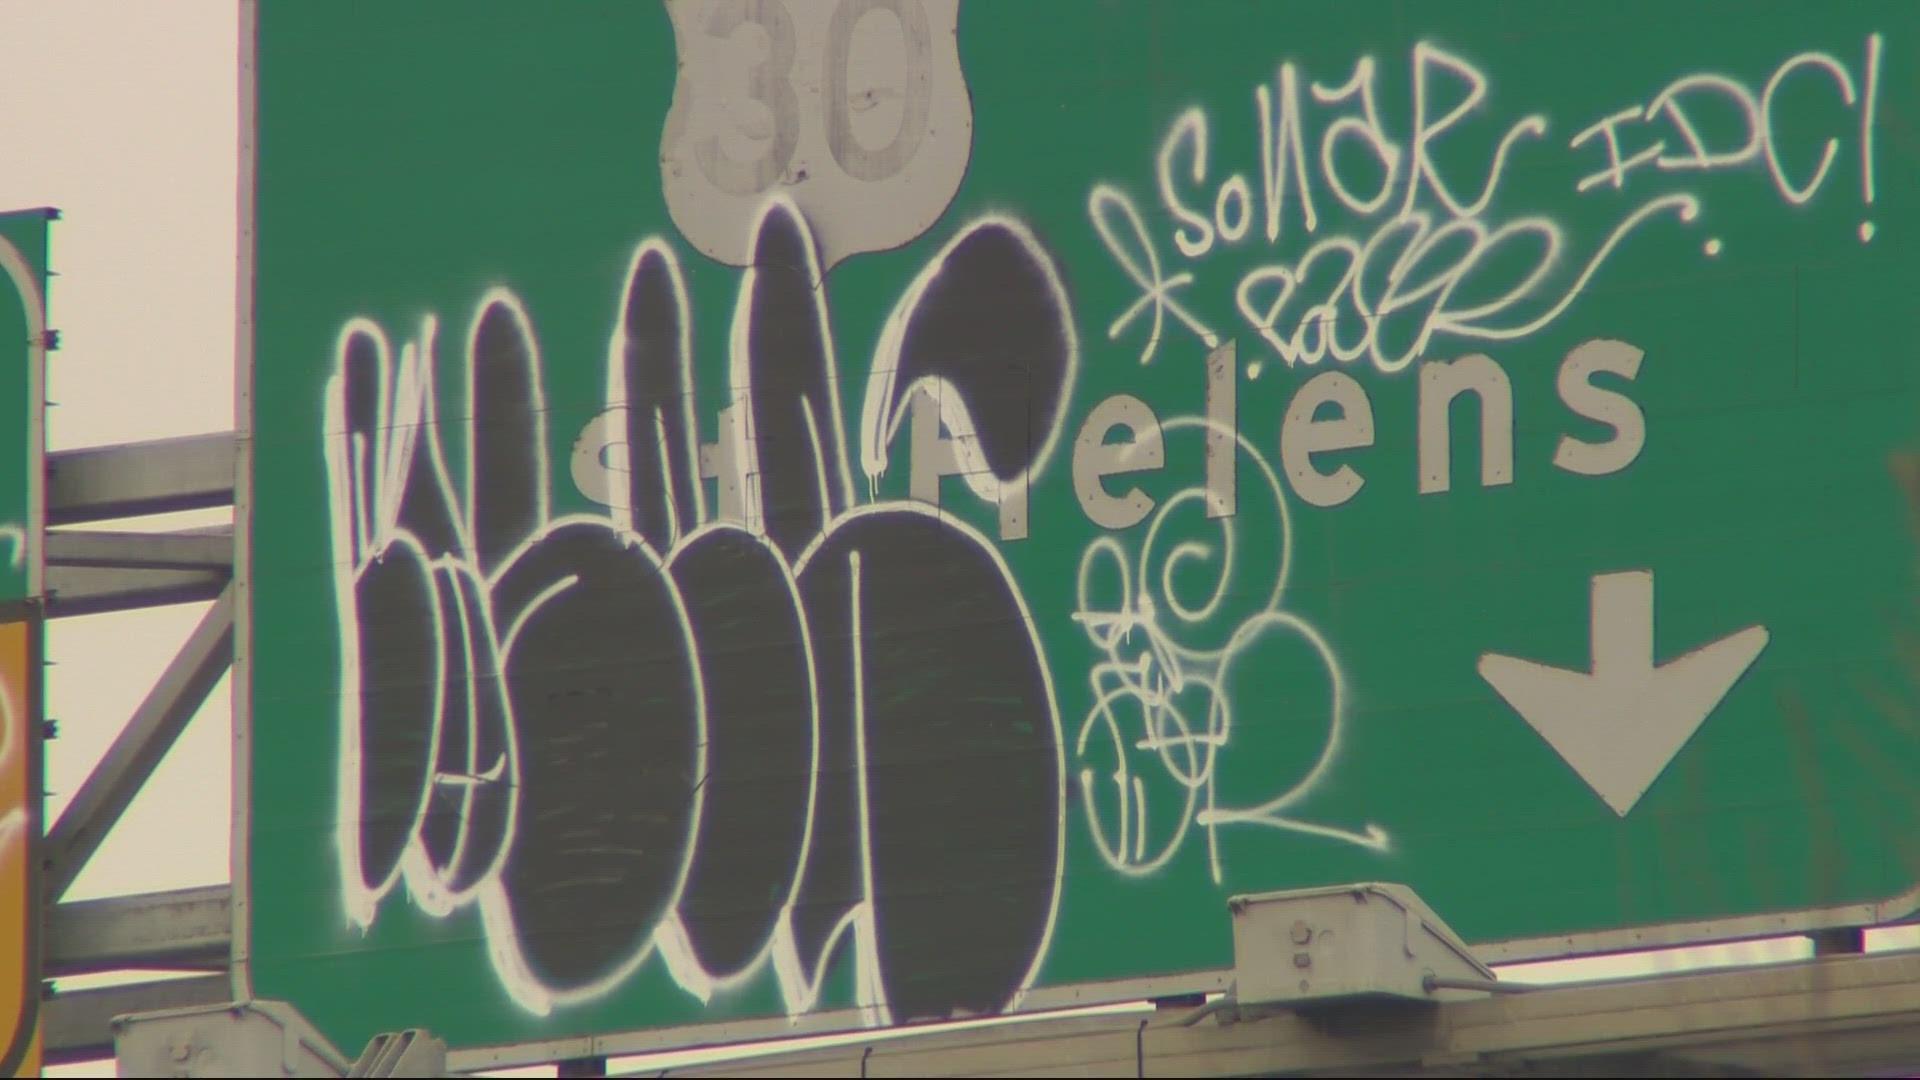 For the last several years, the state transportation agency has had extra funding to tackle graffiti on state rights of way. That money has since dried up.